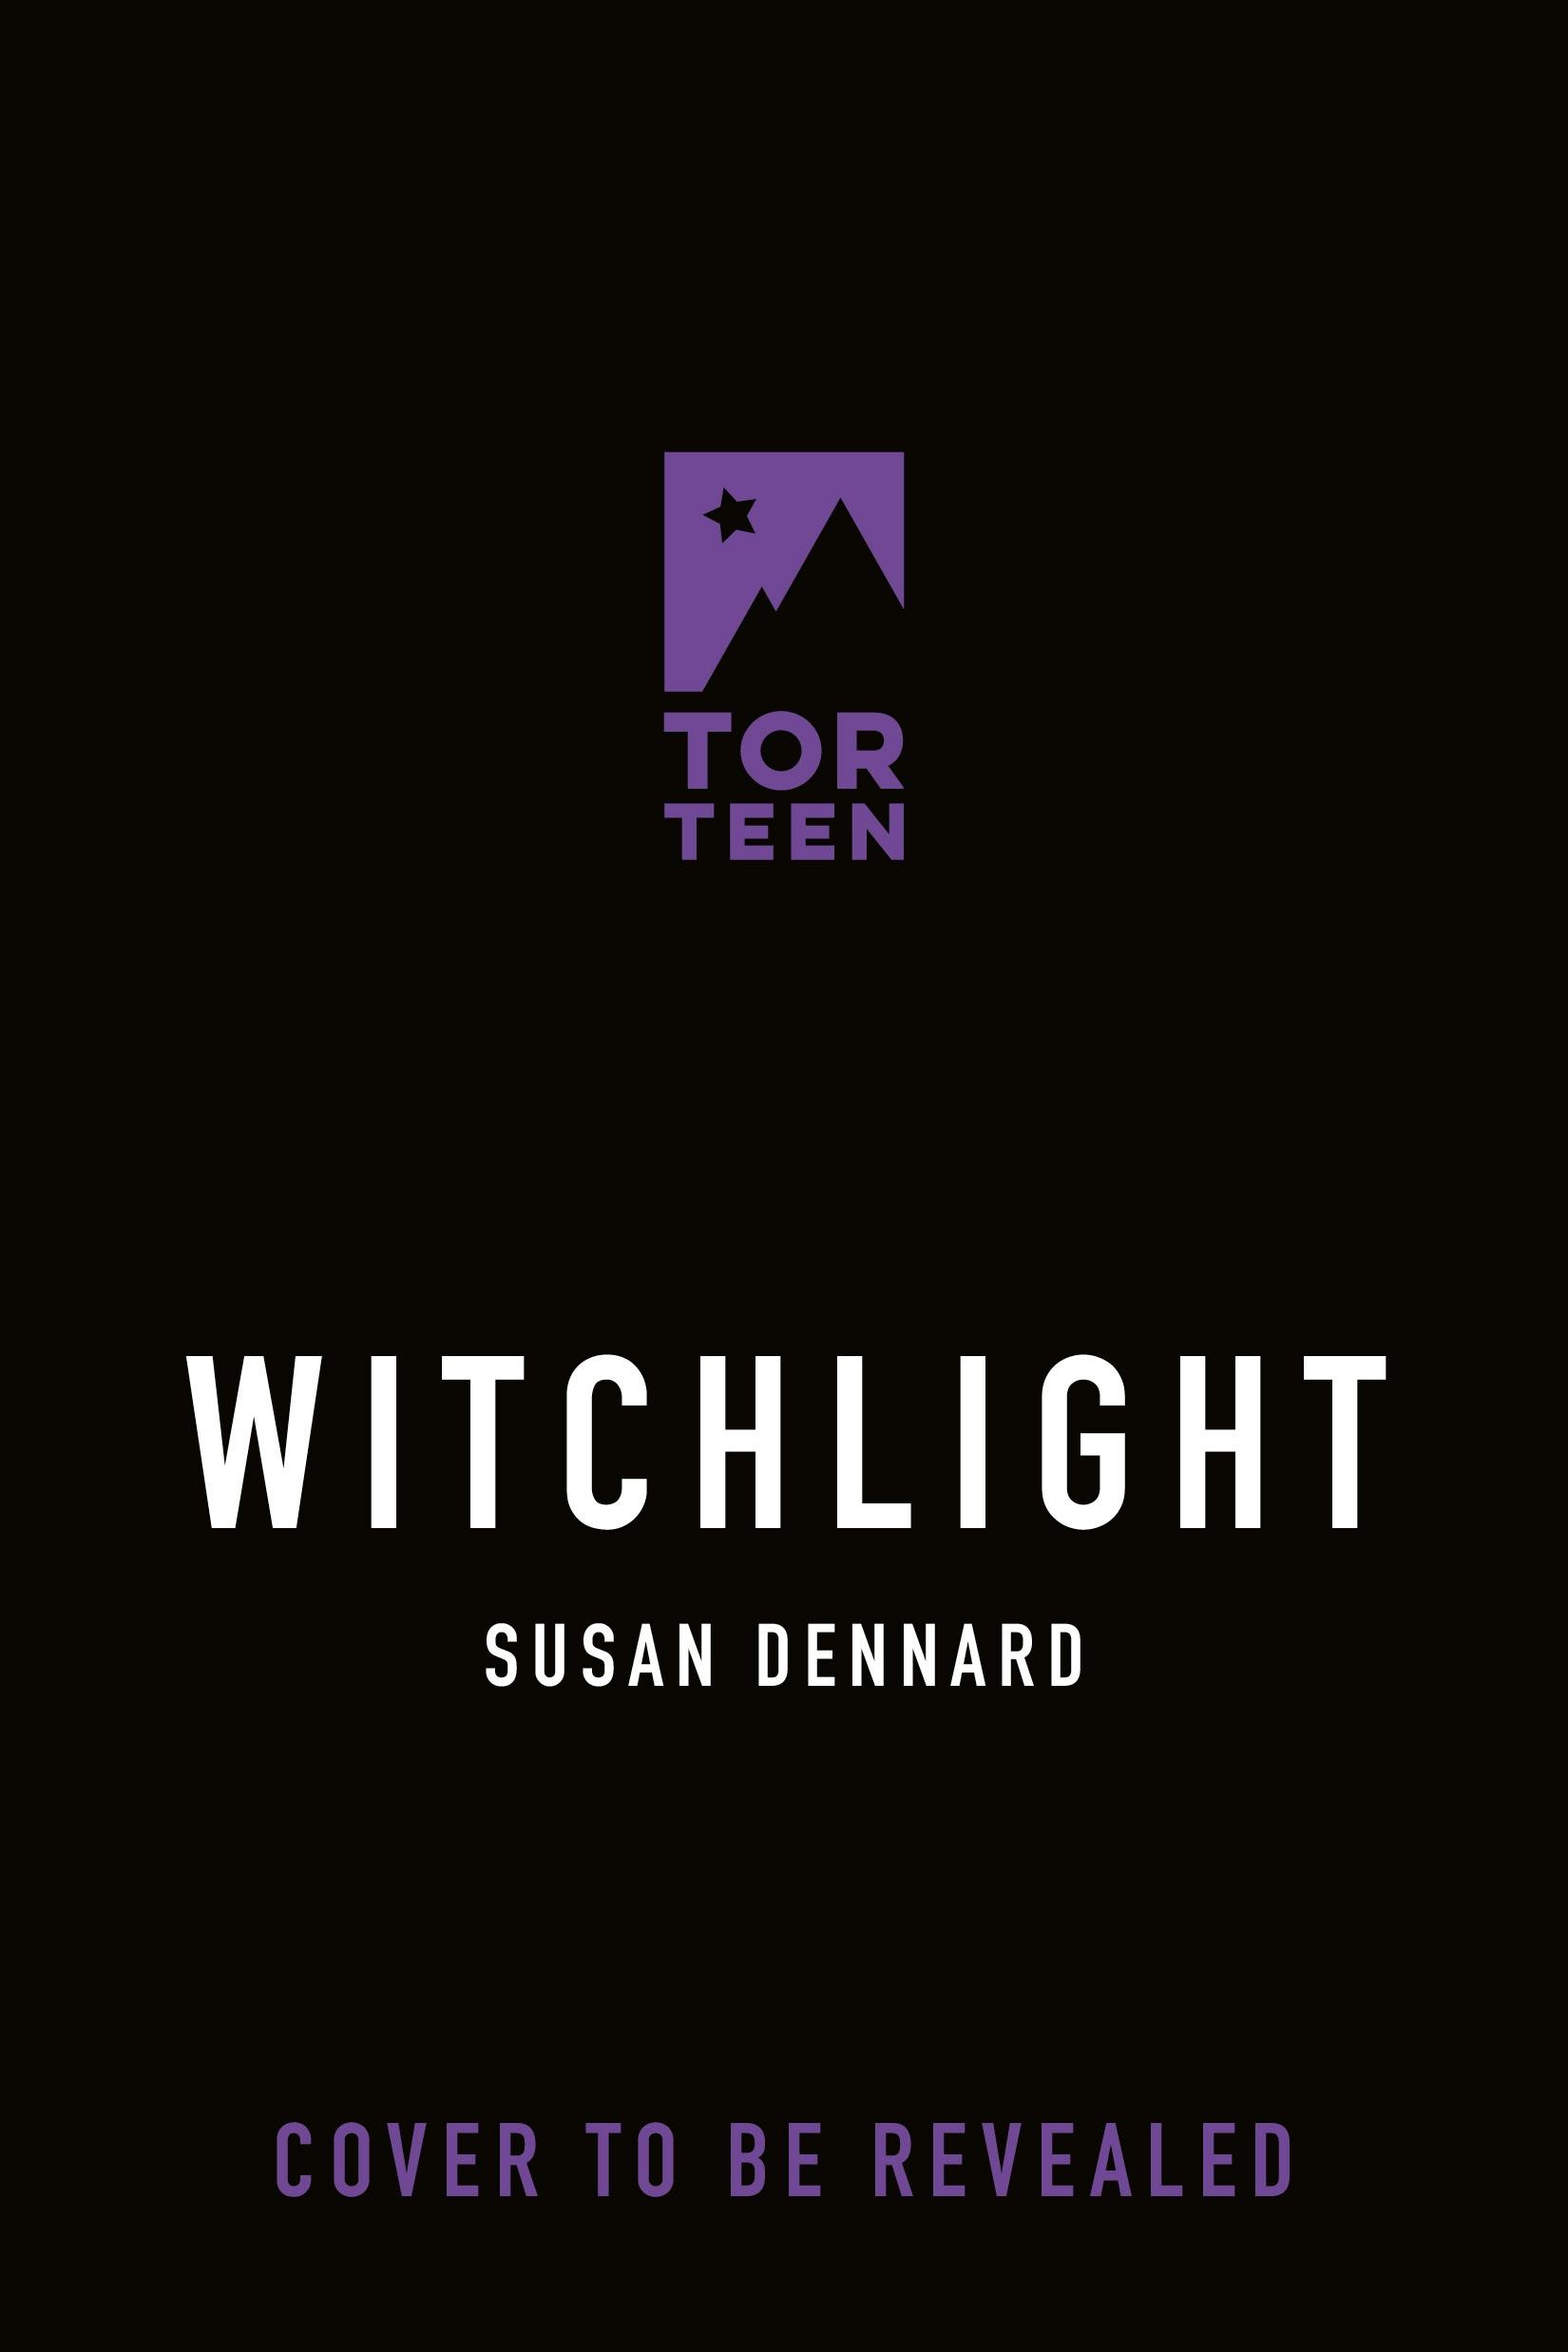 Image of Witchlight